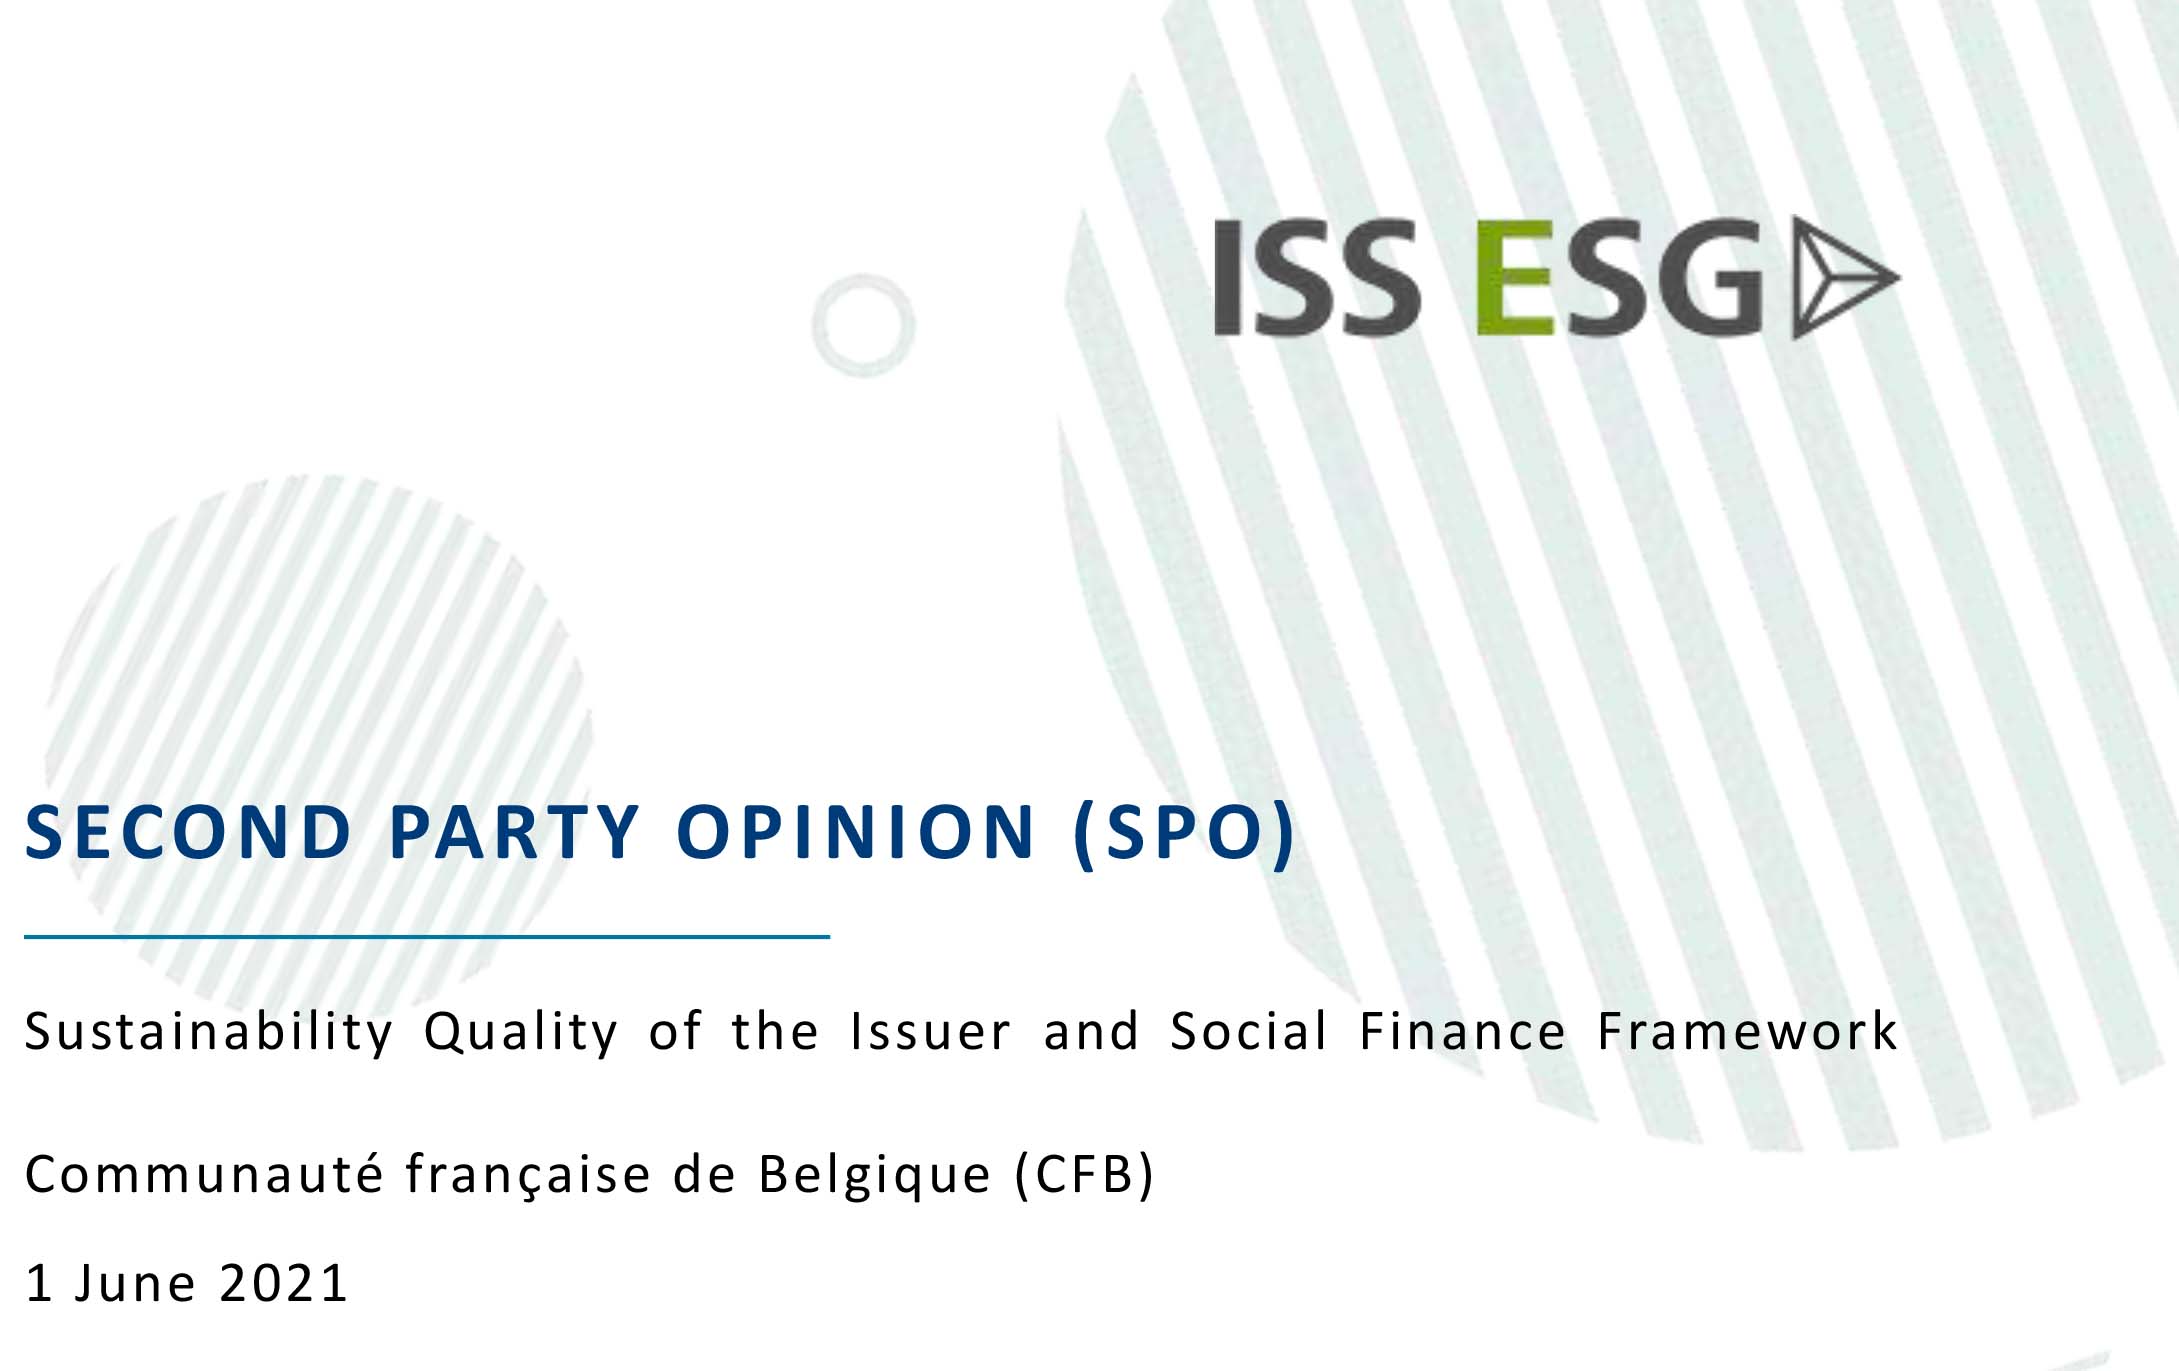 Second Party Opinion (ISS)